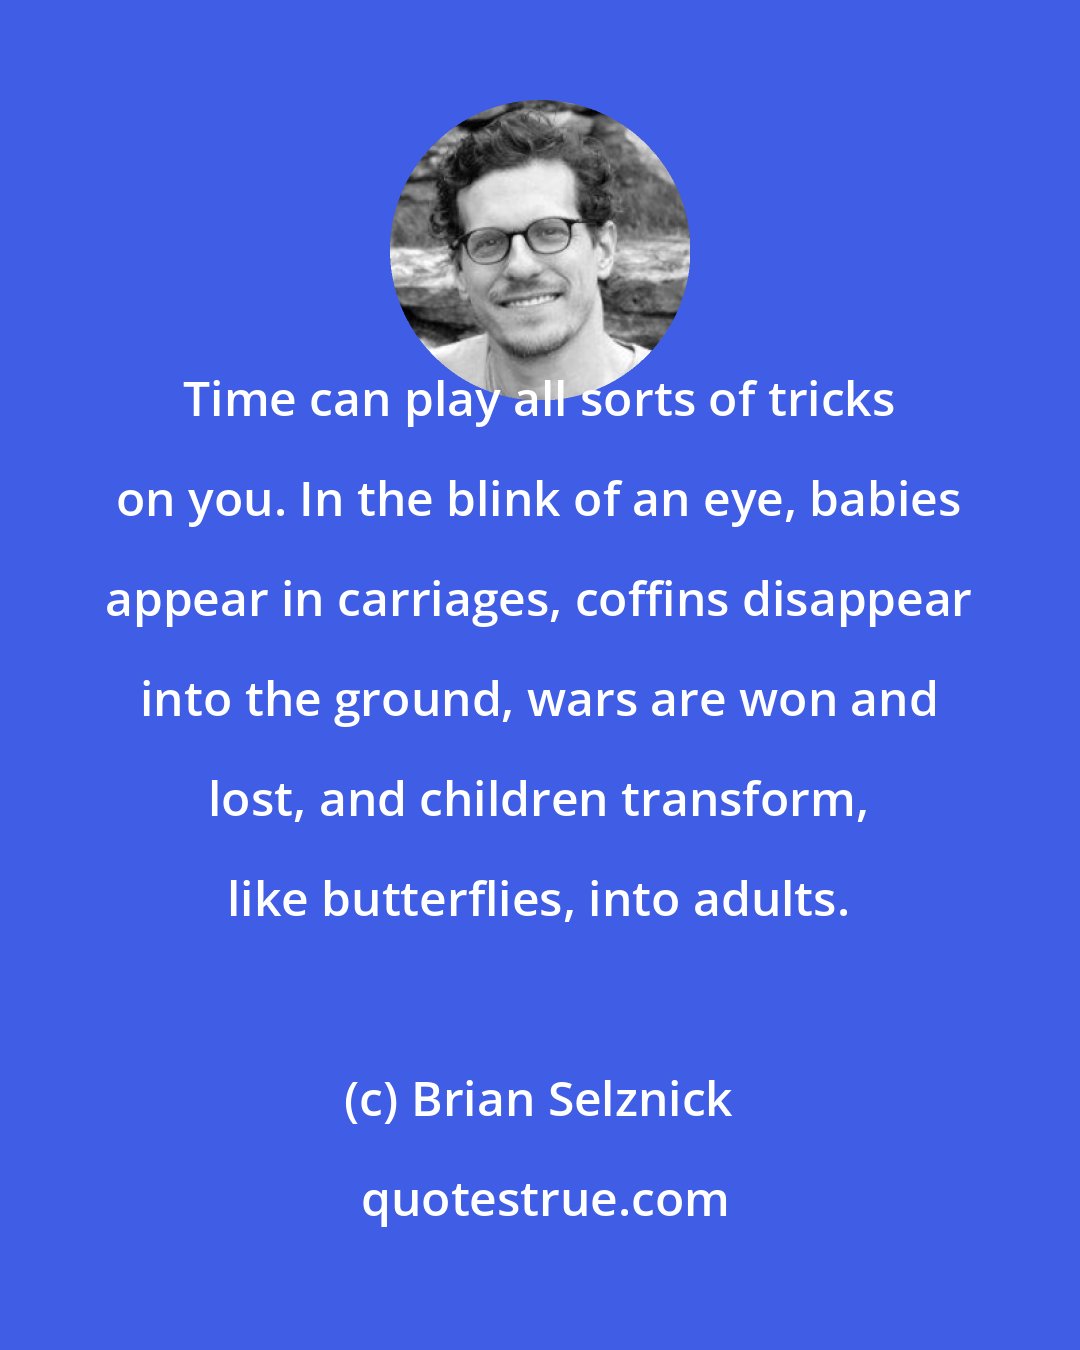 Brian Selznick: Time can play all sorts of tricks on you. In the blink of an eye, babies appear in carriages, coffins disappear into the ground, wars are won and lost, and children transform, like butterflies, into adults.